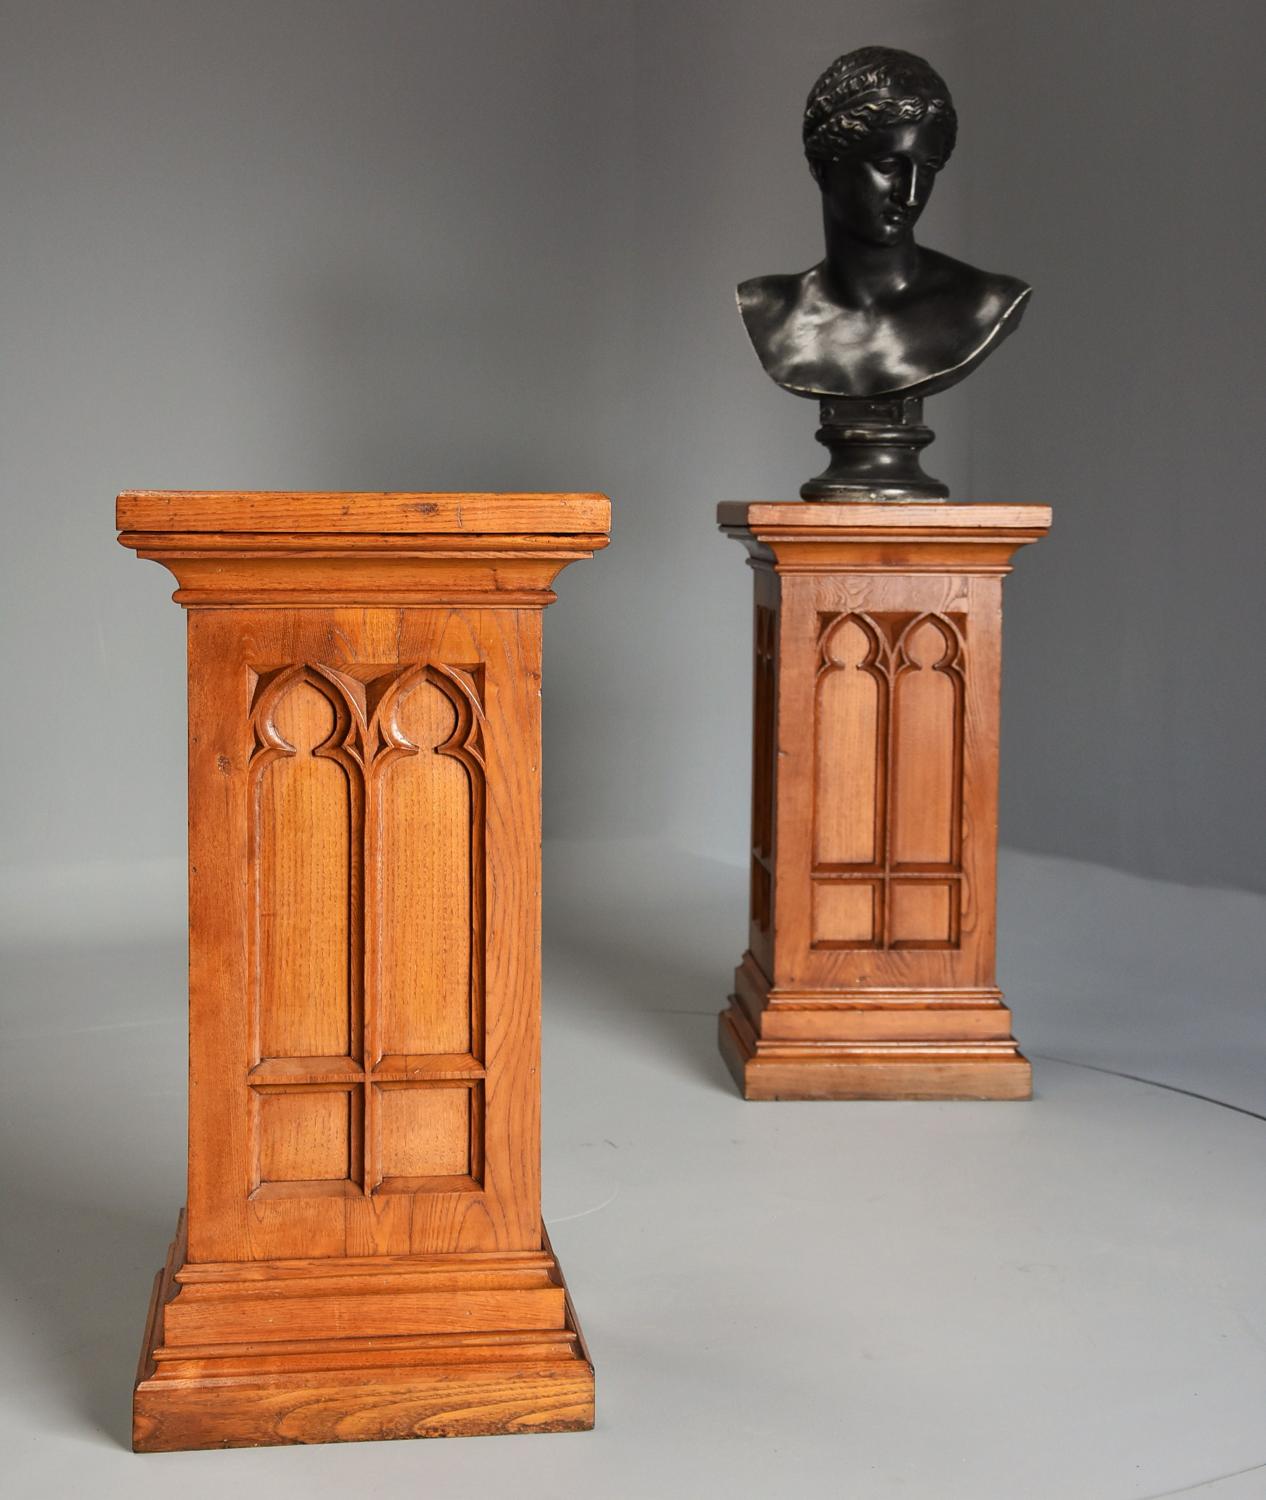 Pair of 19thc pedestals in the Gothic style